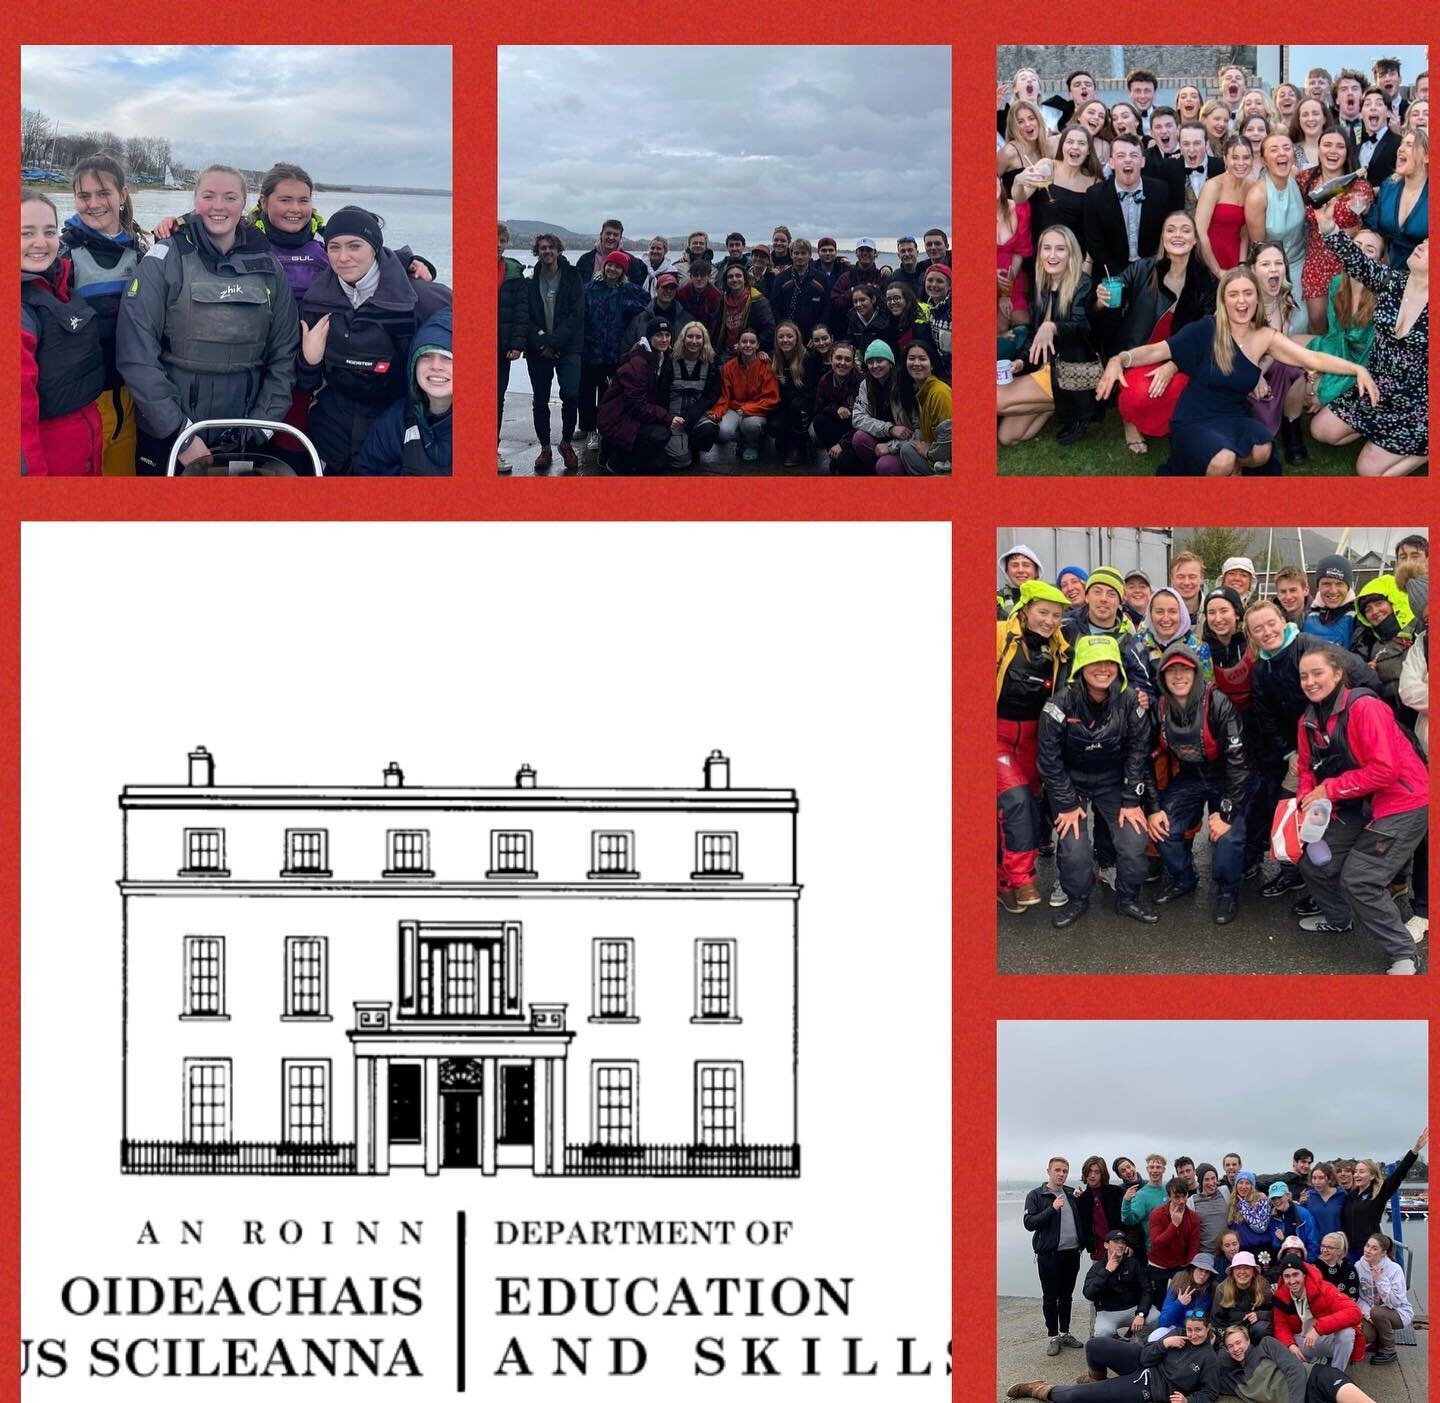 DUSC extends our congratulations to incoming first years on the completion of their Leaving Certificate Exams.

An education at @trinitycollegedublin is a truly honourable experience. Not to mention the fabulous sporting extracurriculars on offer. @t